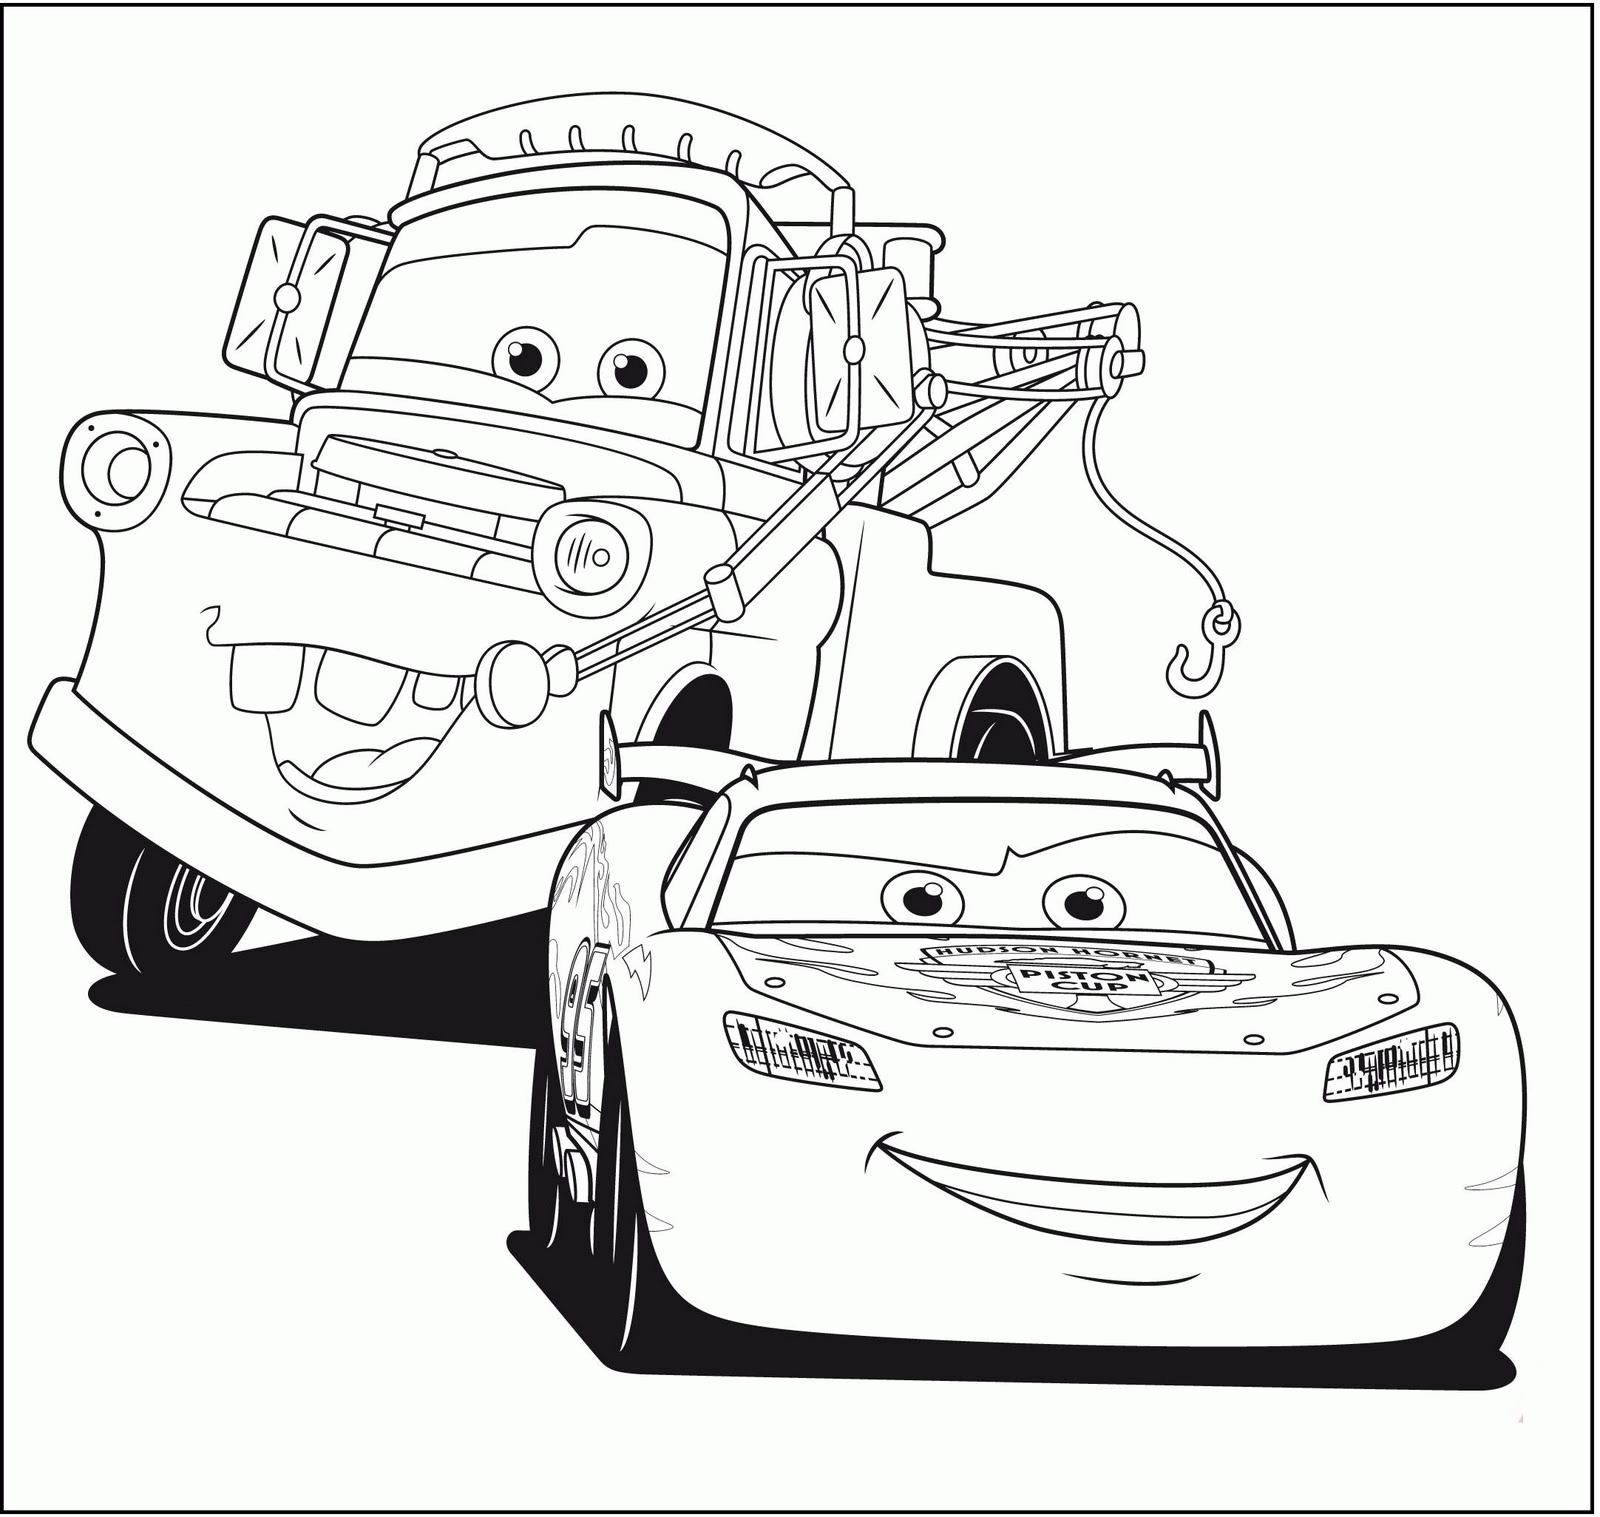 Racing Car Coloring Pages Coloring Pages Printable - VoteForVerde.com